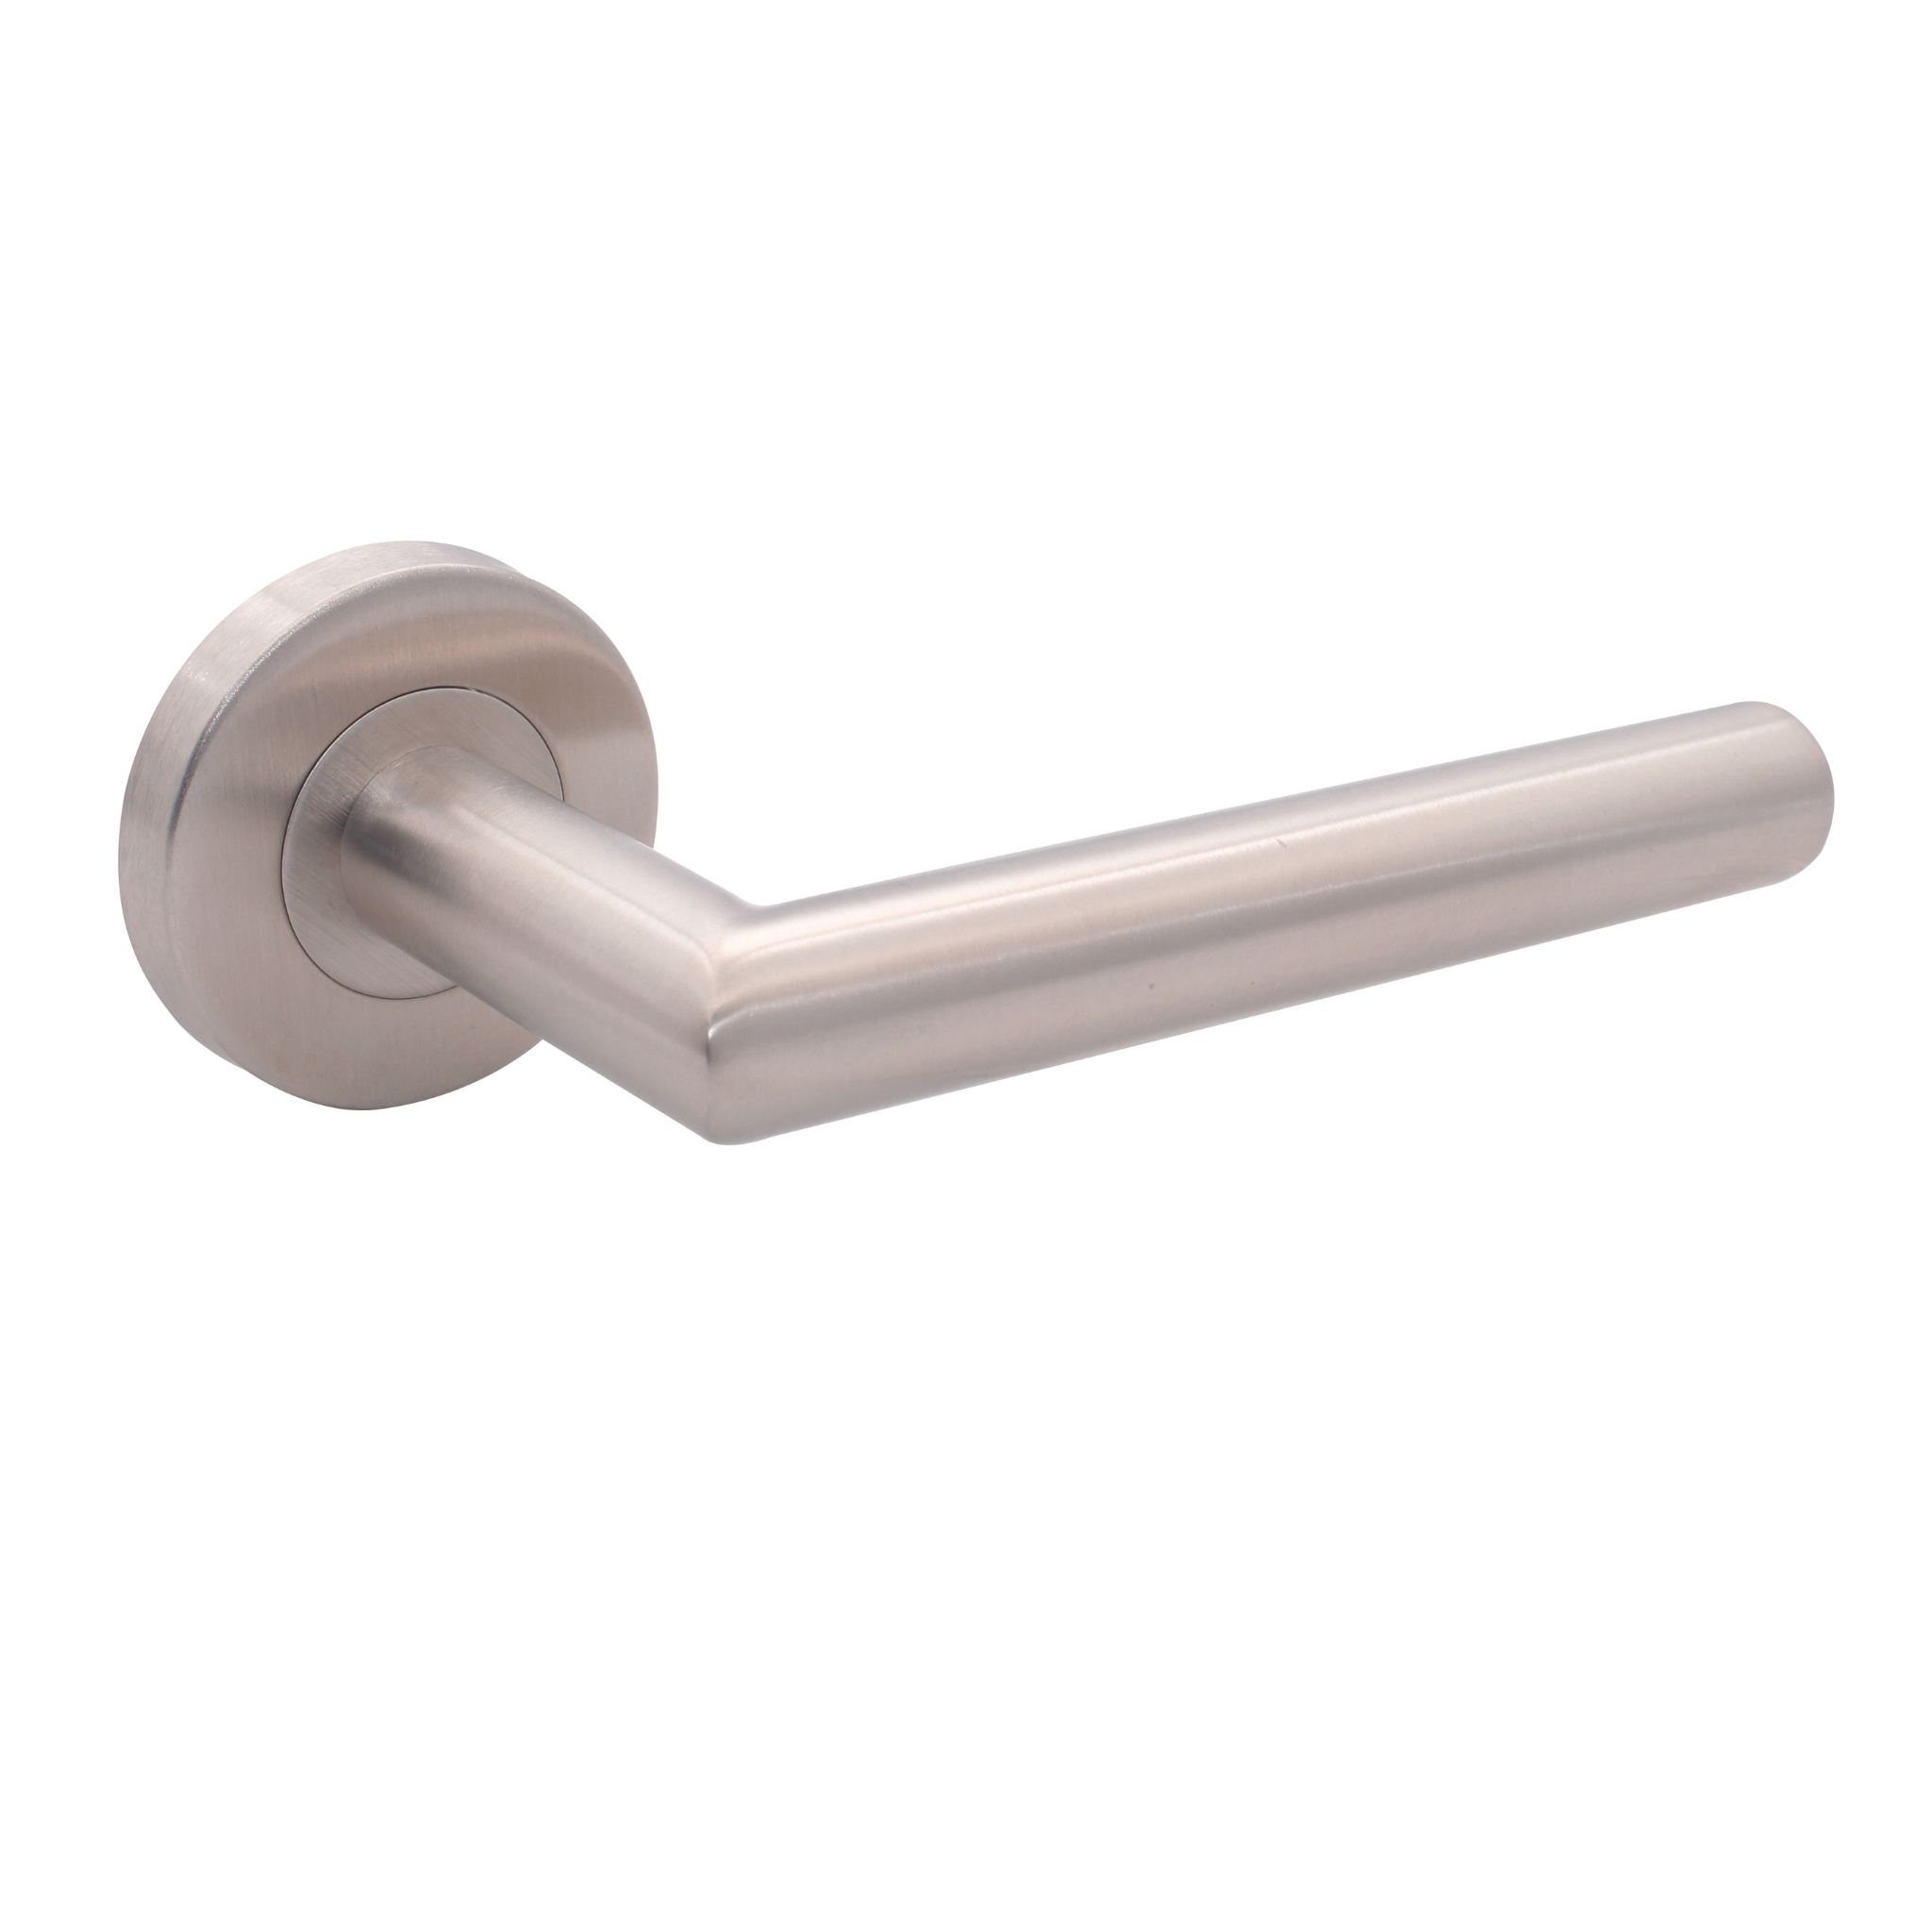 FT02.R._.SS, Lever Handles, Tubular, On Round Rose, With Escutcheons, 134mm (l), Stainless Steel, CISA